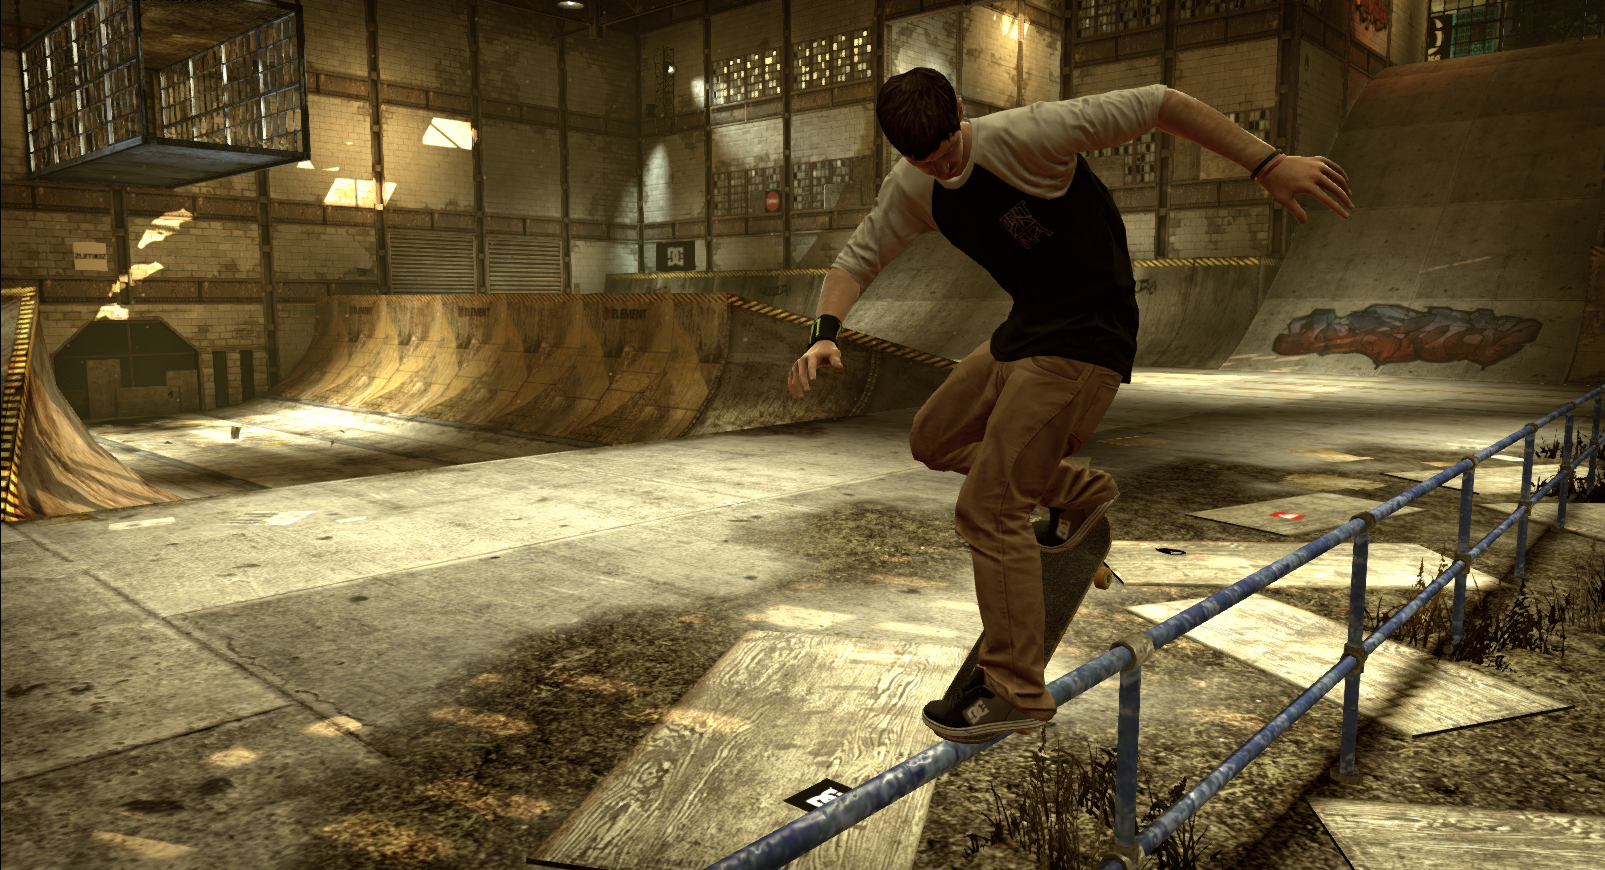 Amazing Tony Hawk's Pro Skater HD Pictures & Backgrounds